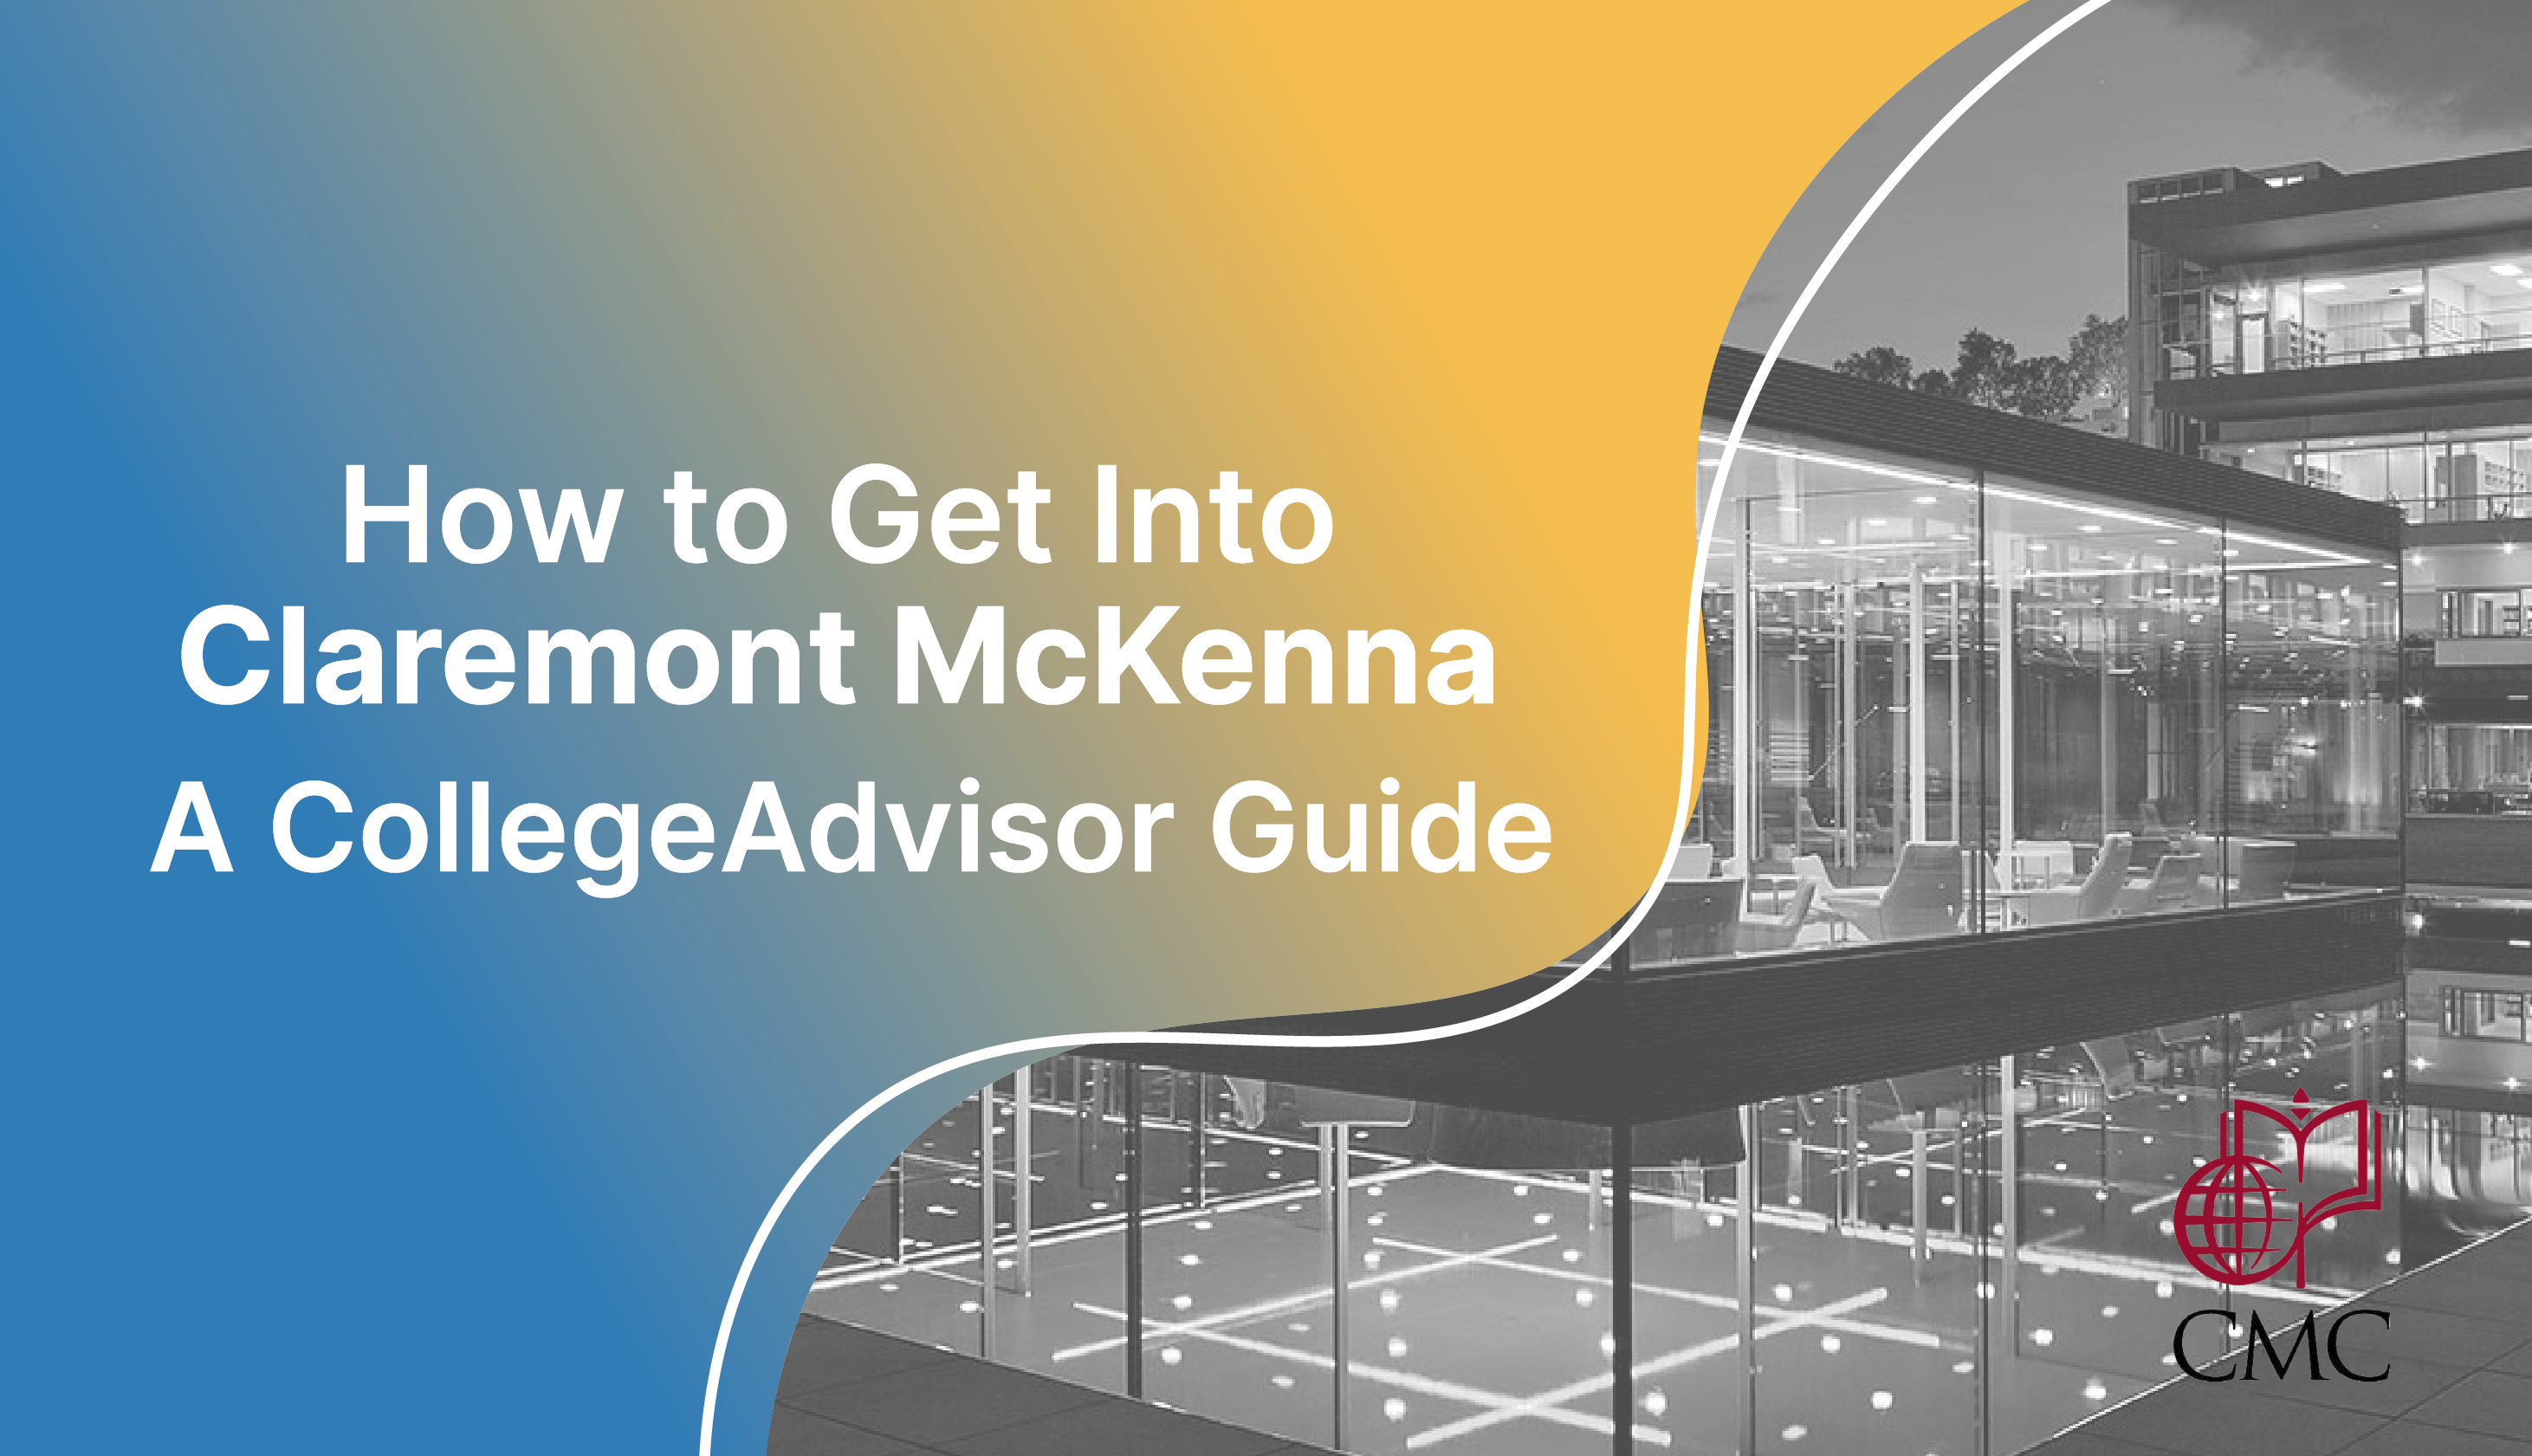 How to Get Into Claremont McKenna Guide quot